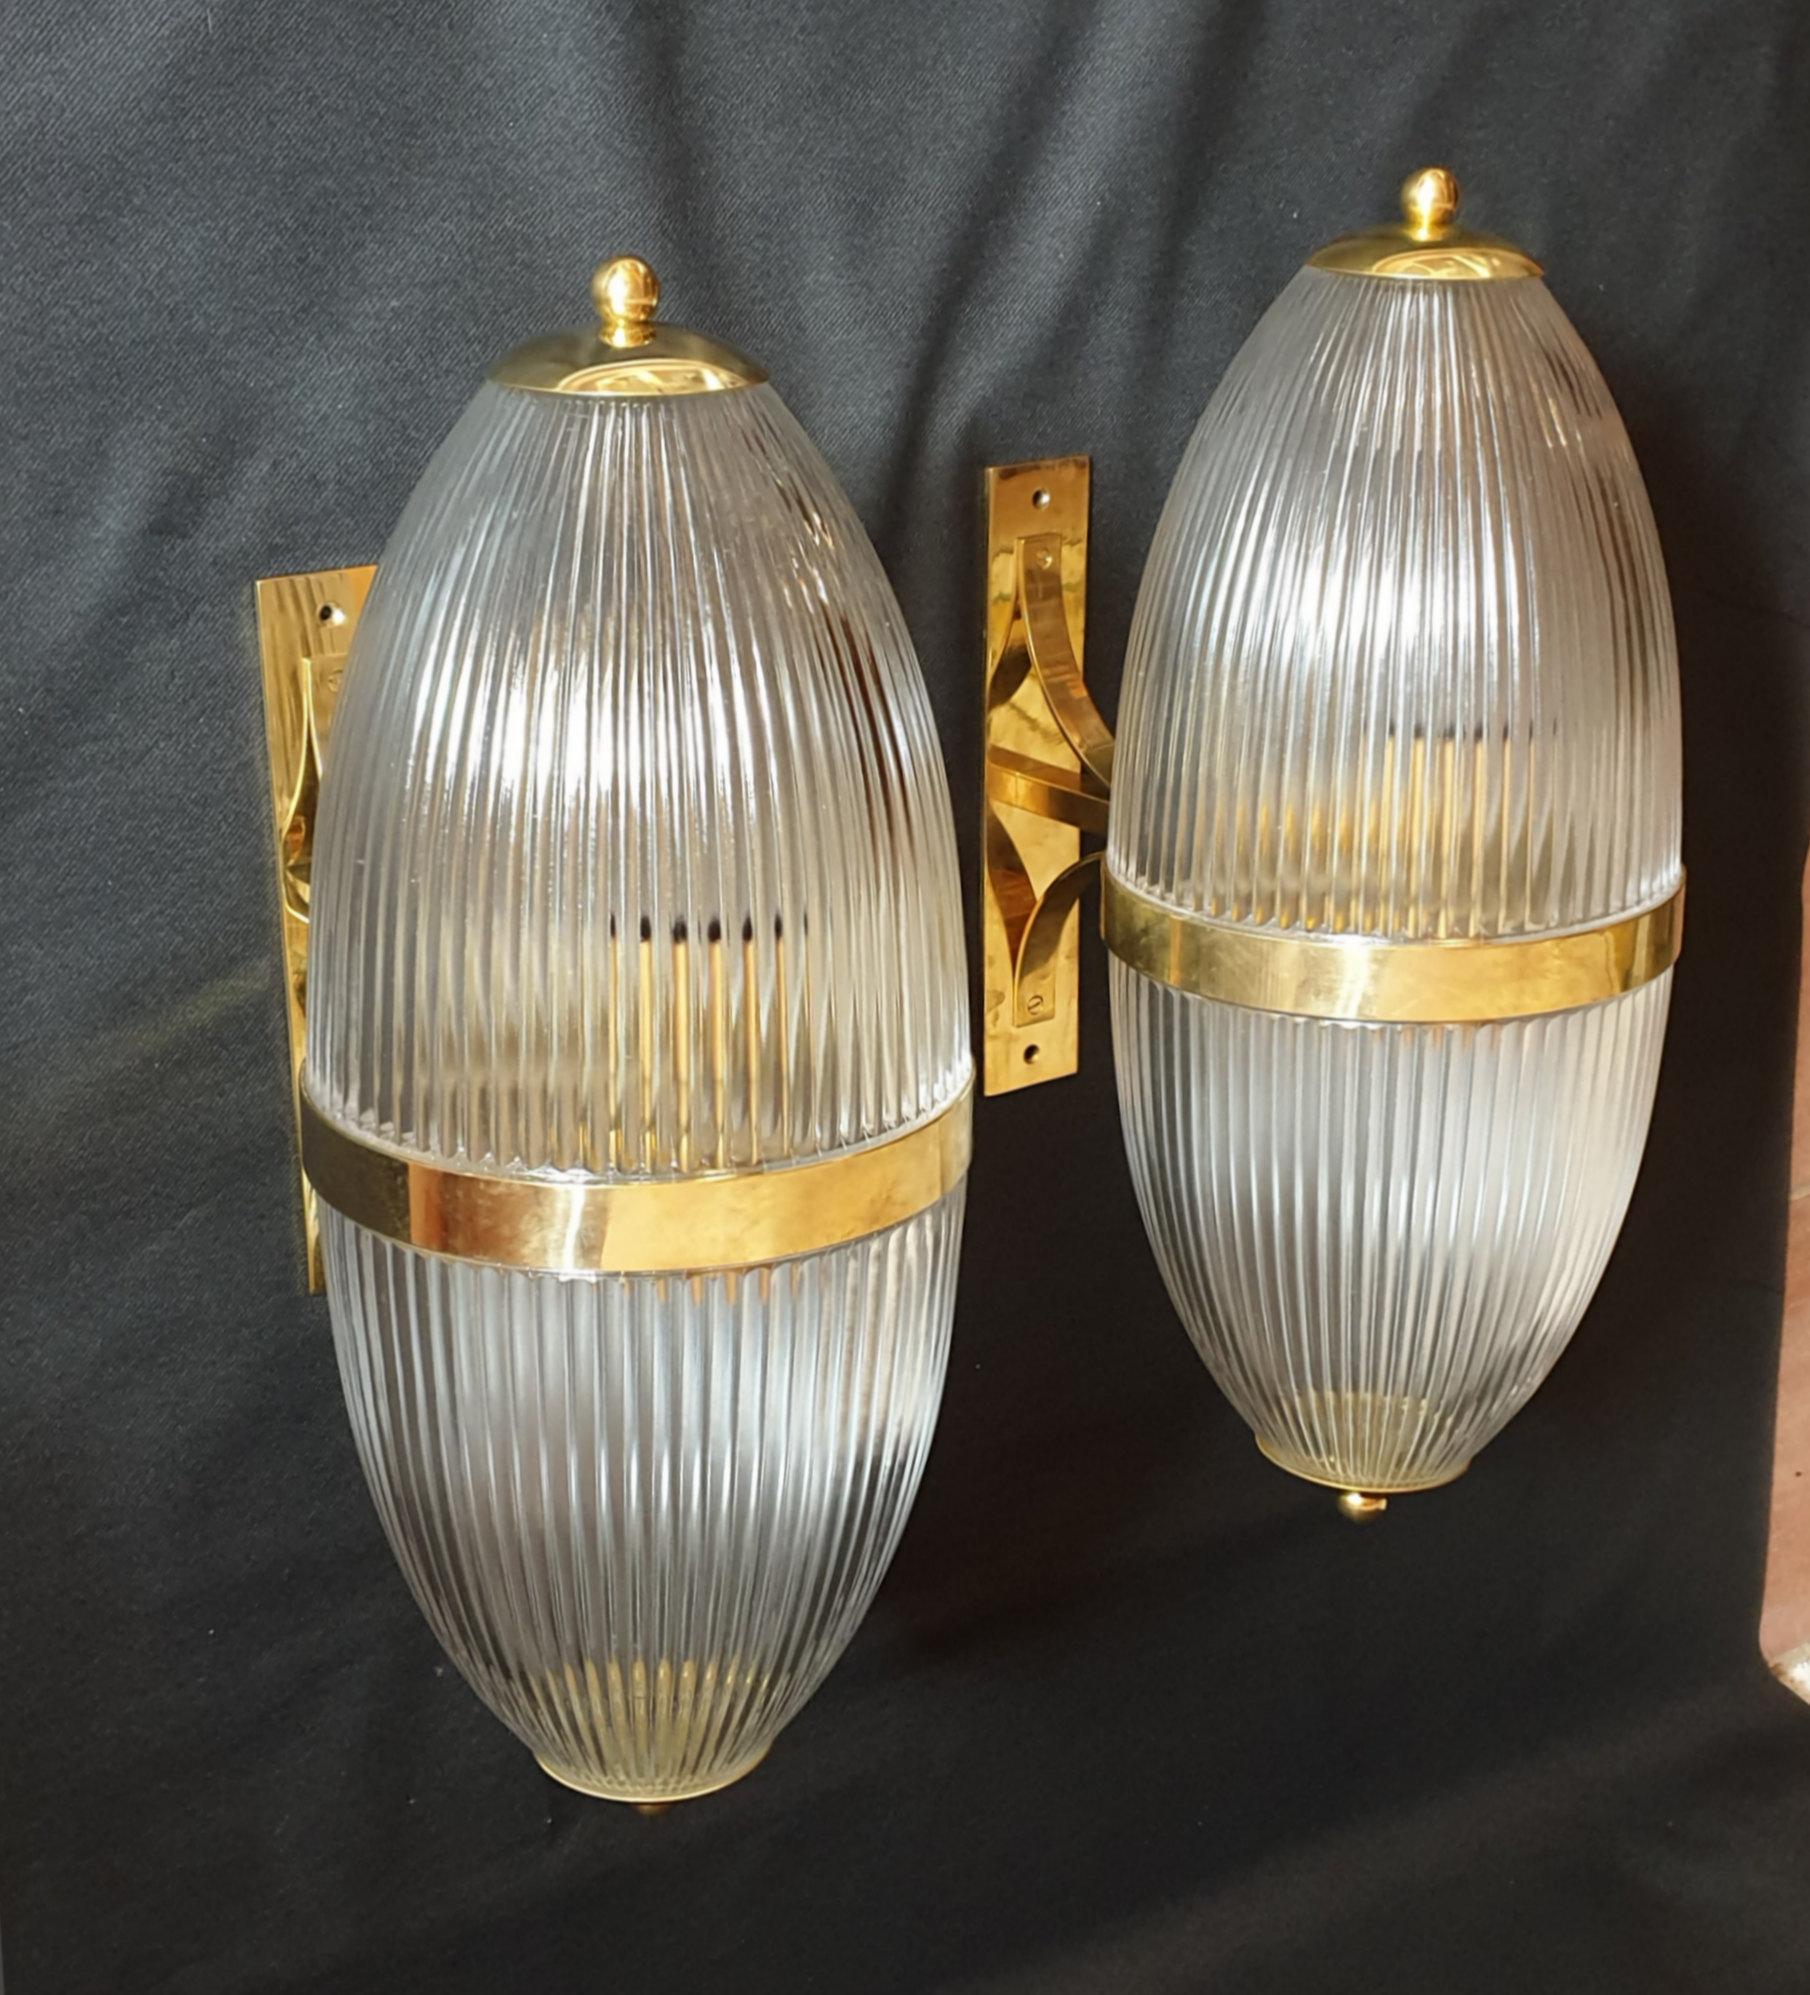 Pair of Large Mid-Century Modern Clear Glass & Brass Italian Sconces or Lanterns 1